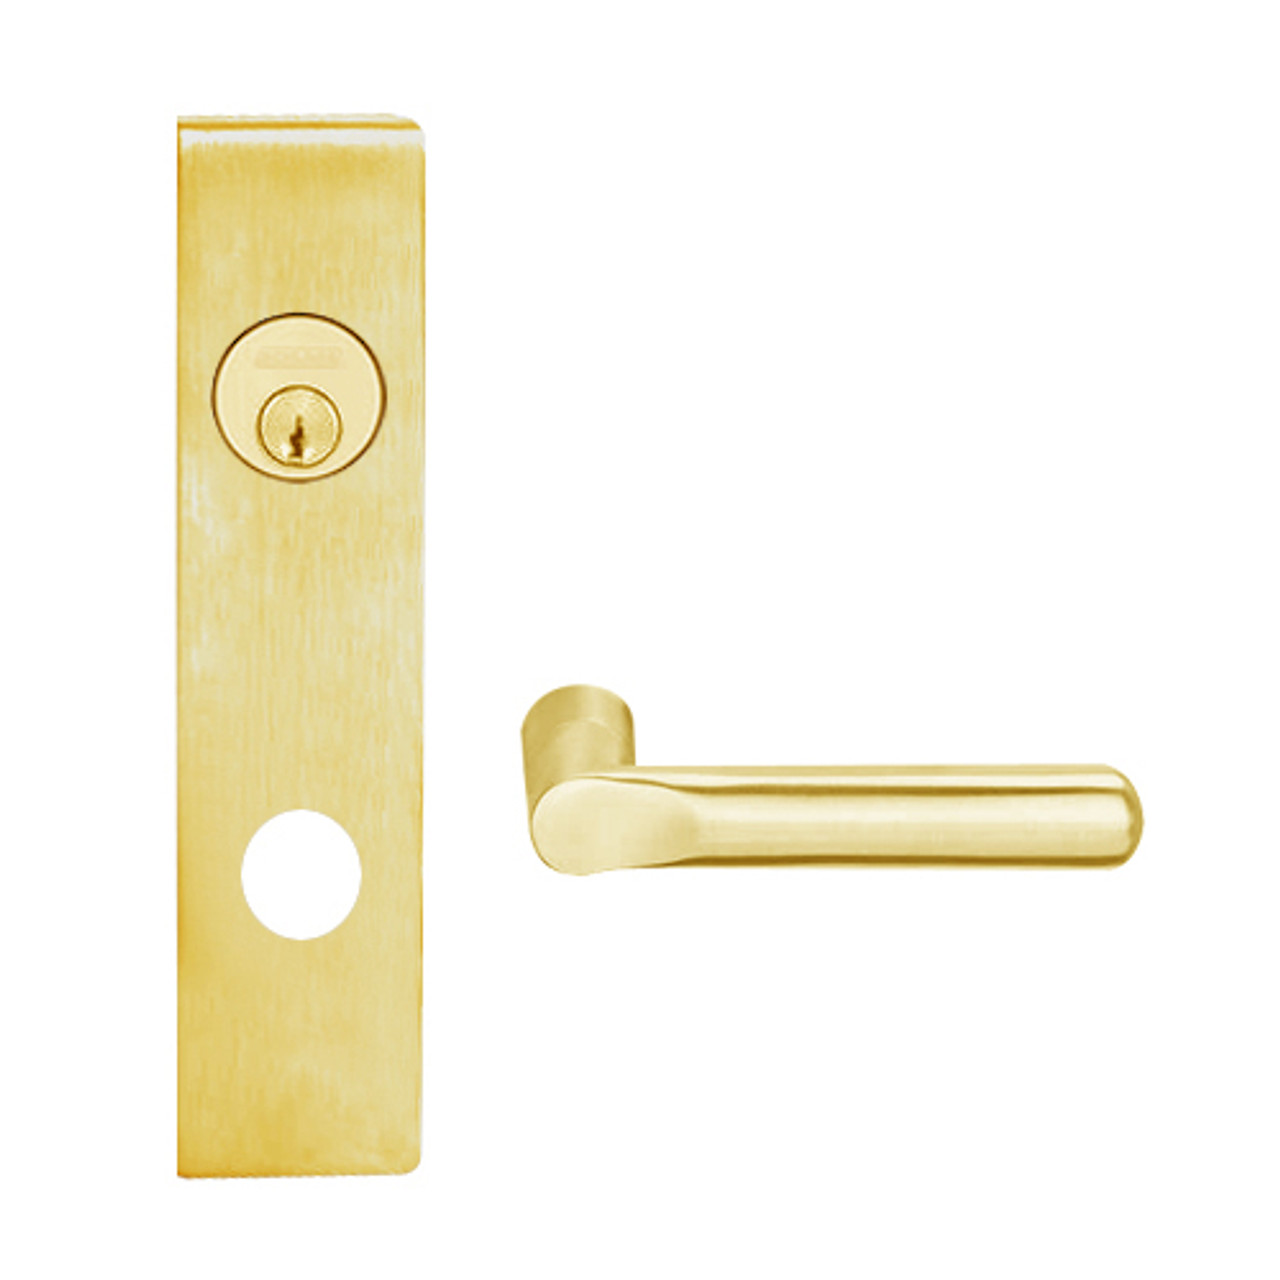 L9026L-18L-605 Schlage L Series Less Cylinder Exit Lock with Cylinder Commercial Mortise Lock with 18 Cast Lever Design in Bright Brass